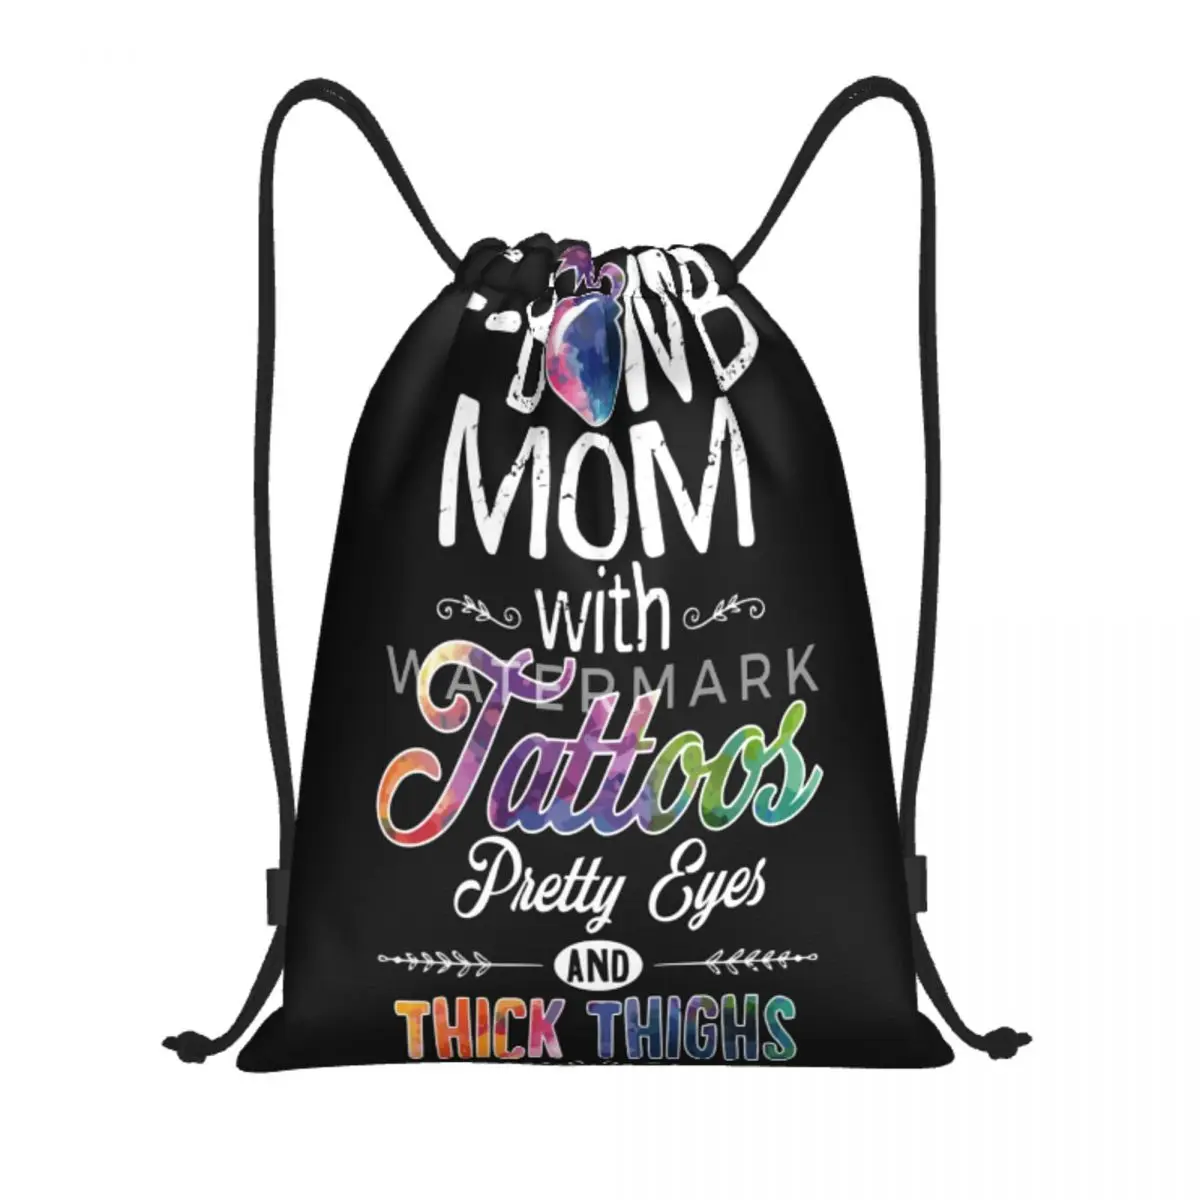 

Fbomb Mom With Tattoos Pretty Eyes Thick Thighs Drawstring Bags,Backpack Personalized Bag Draw string closure Travel Nice gift